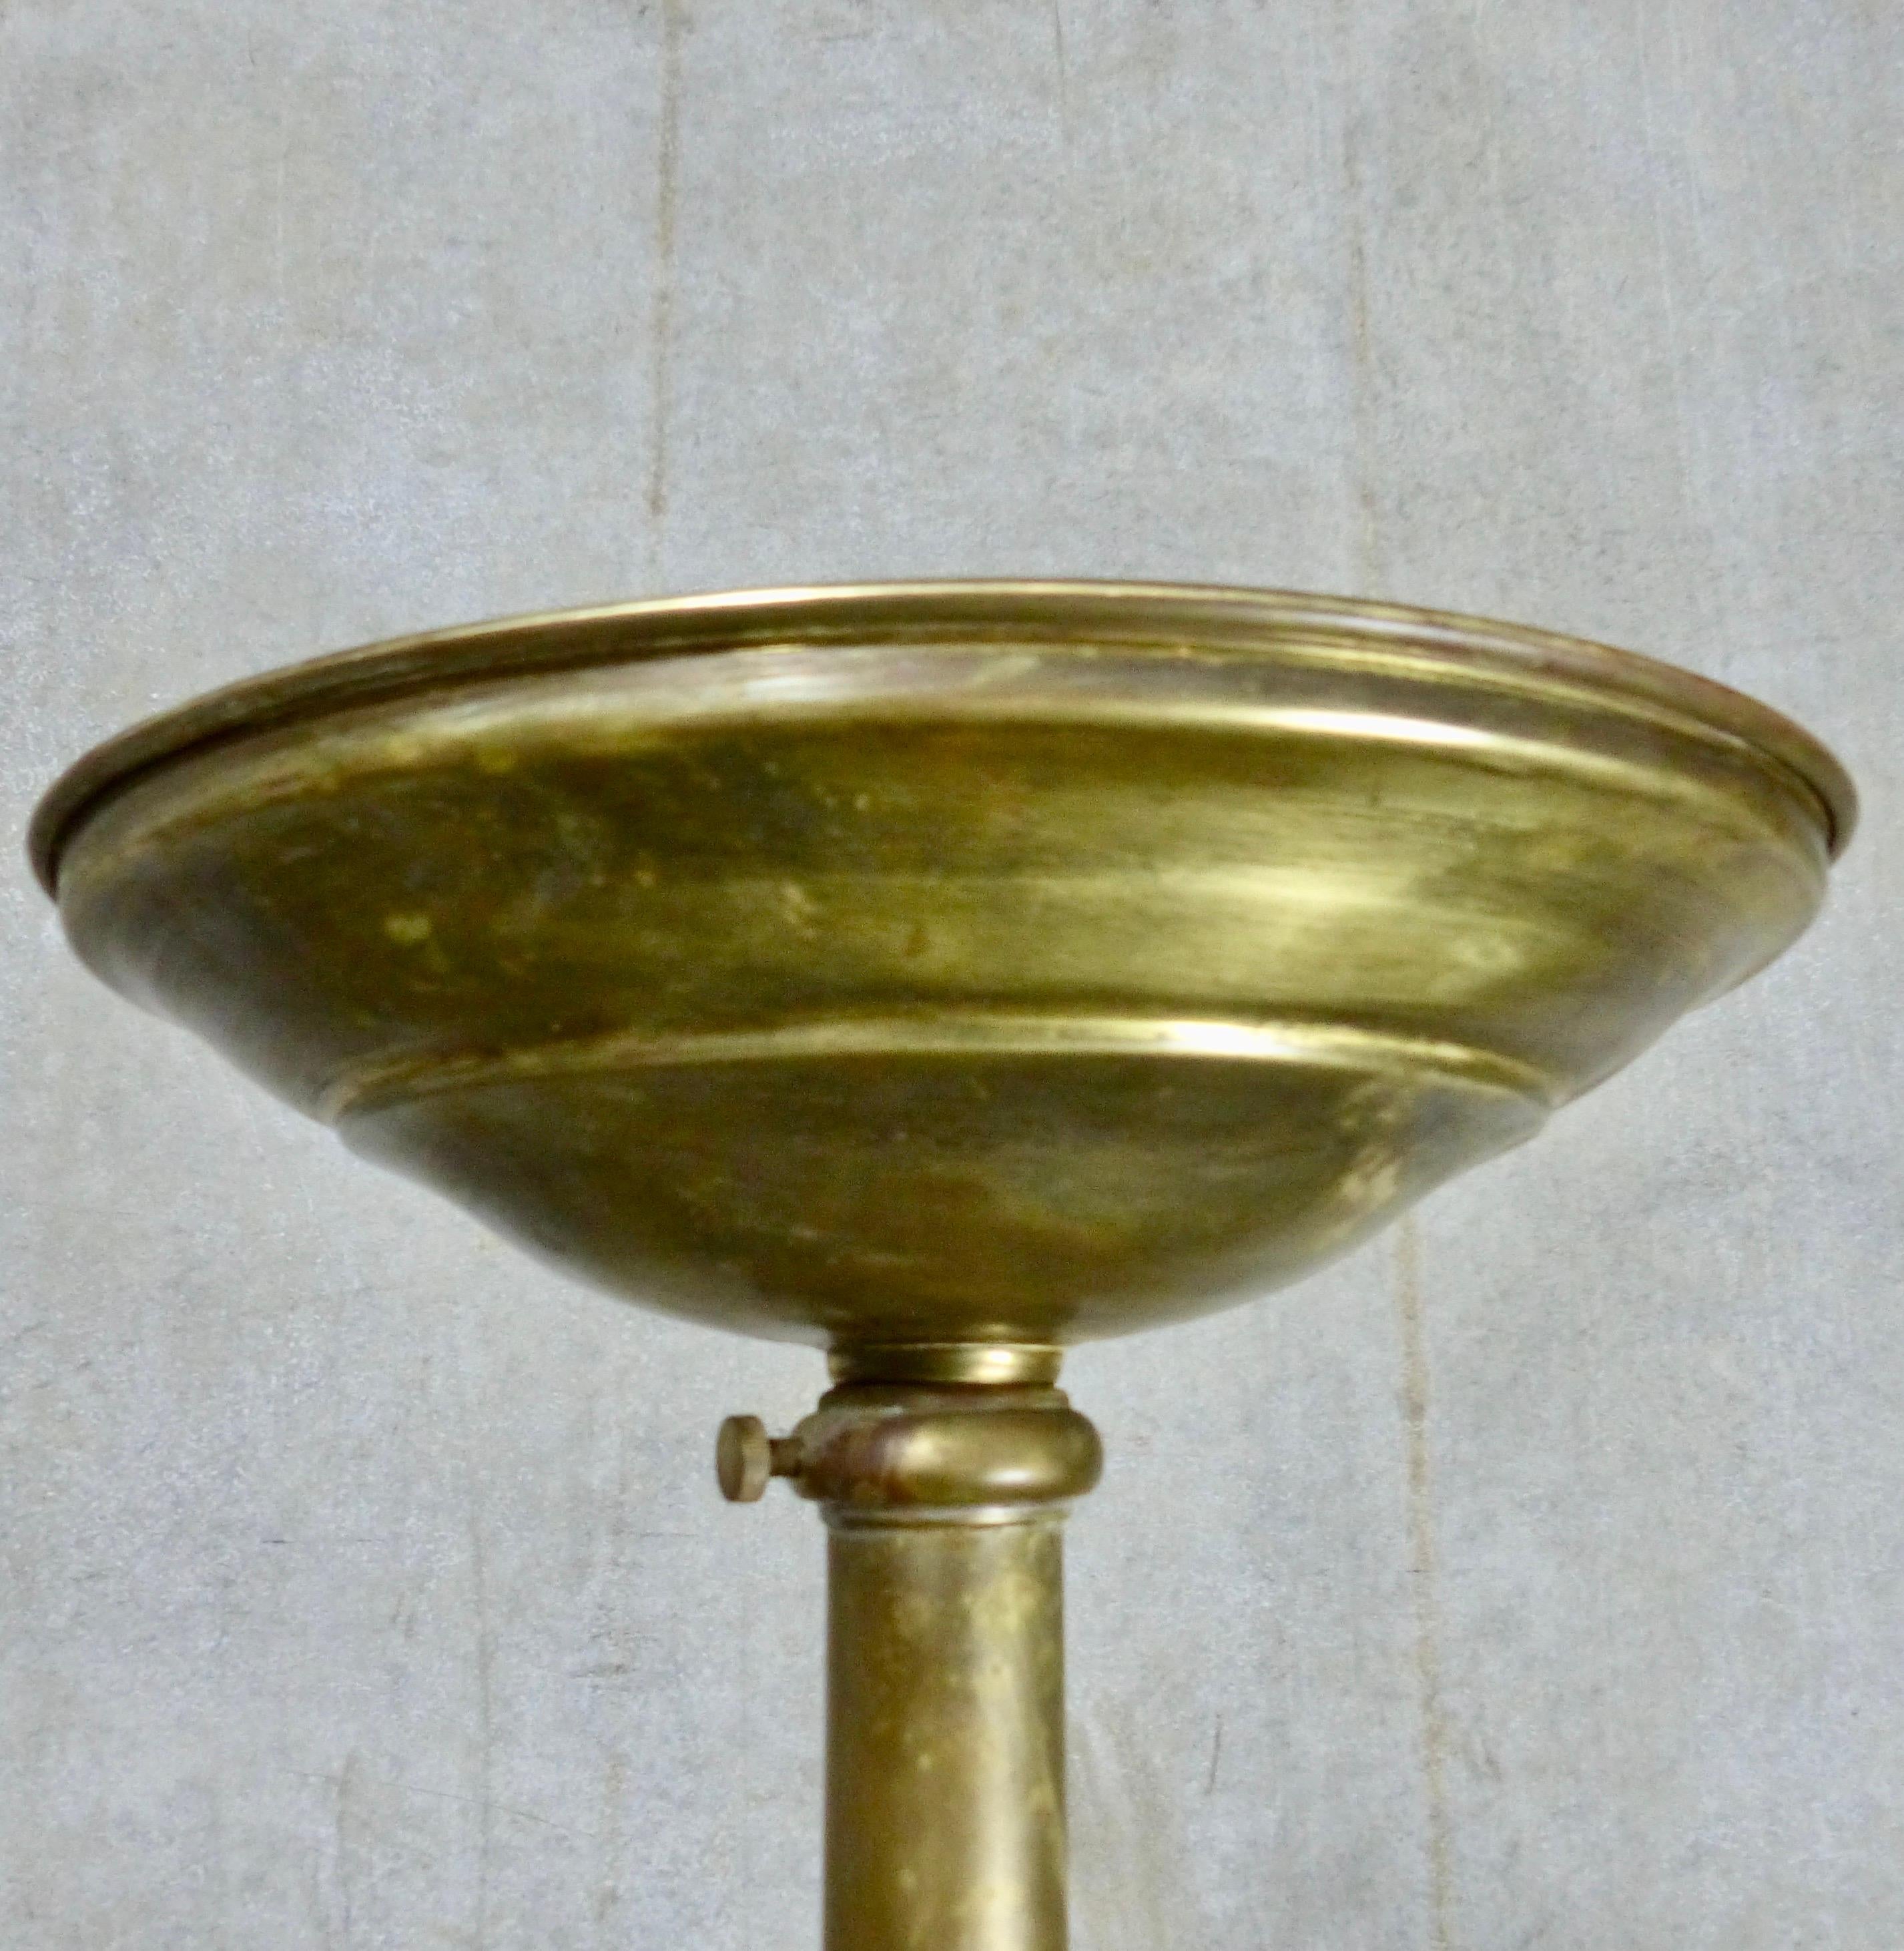 Nicely balanced brass plant display stand. Classic proportions in a solid brass display plant stand.
Dimensions: 36” height x 11” diameter.